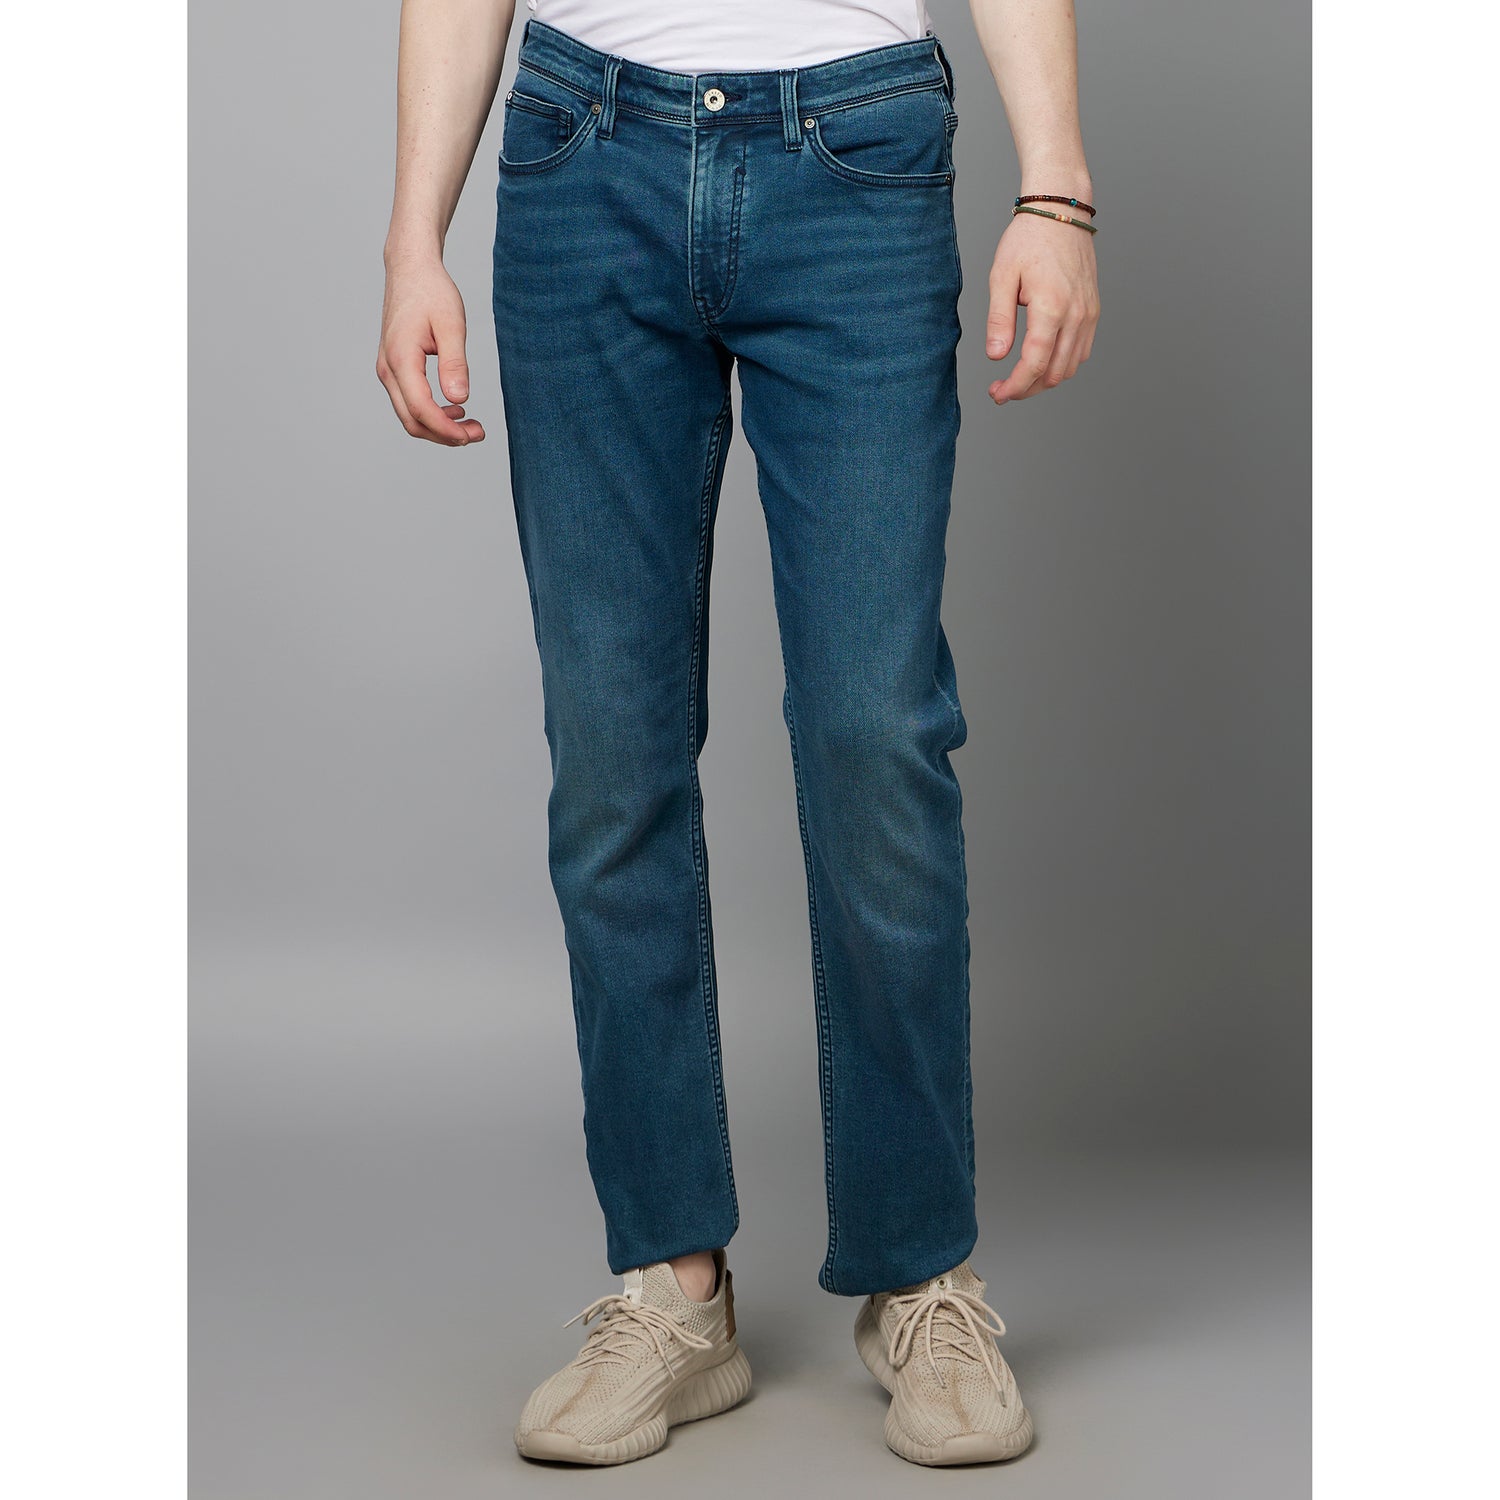 Blue Clean Look Jean Slim Fit Stretchable Jeans (FOKREEN25)